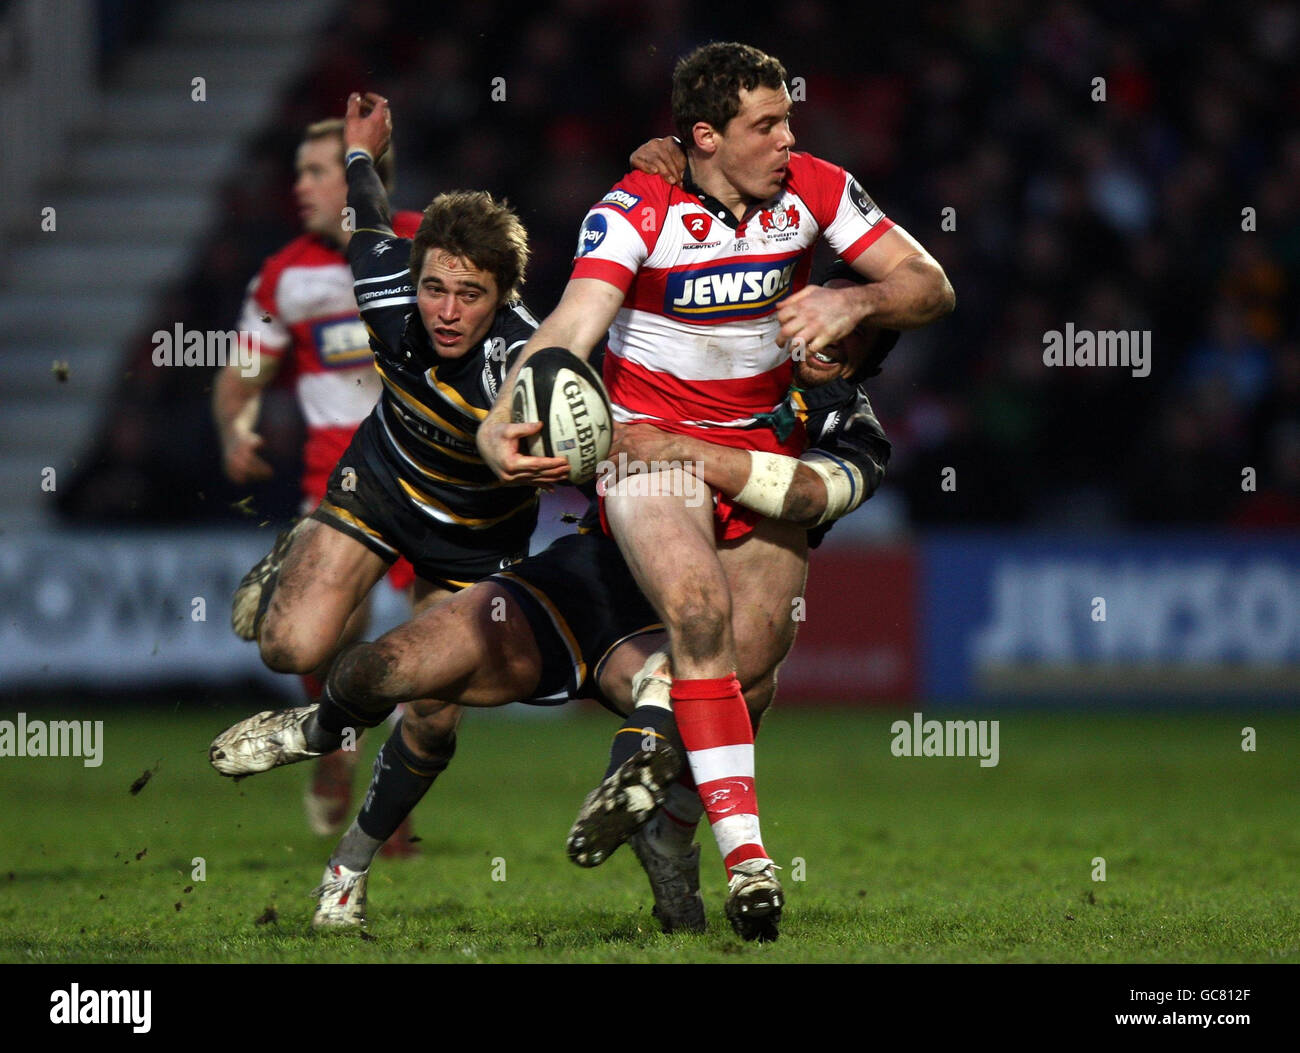 Gloucester's Calum MacRae is tackled by Worcester's Dale Rasmussen during the Guinness Premiership match at Kingsholm, Gloucester. Stock Photo